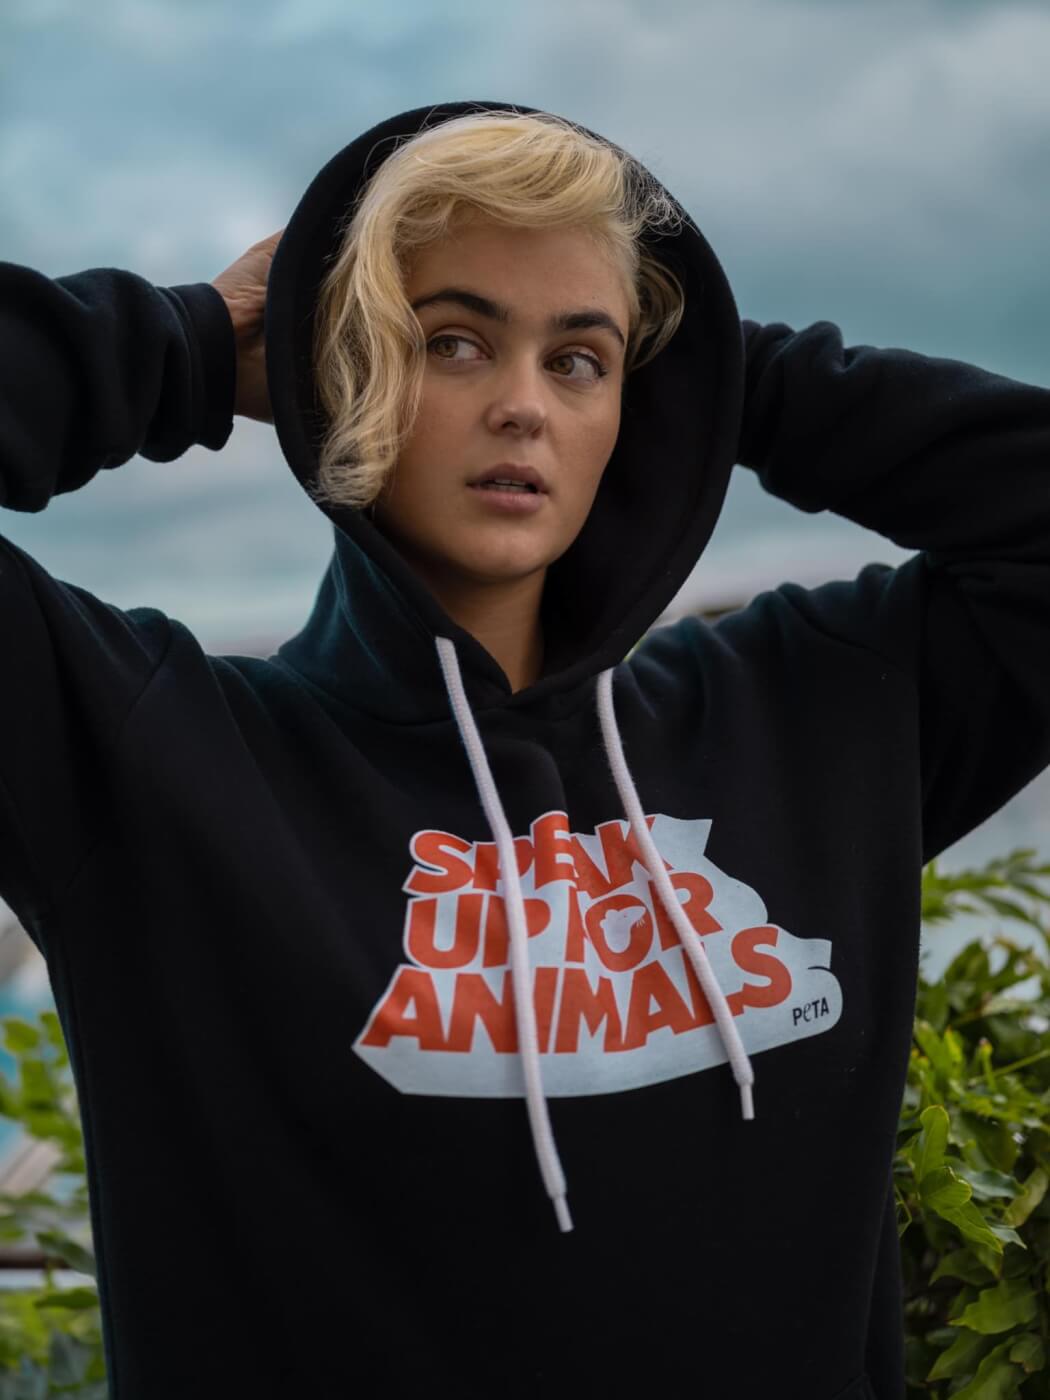 Stefania wears a hoodie that reads "Speak up for animals".